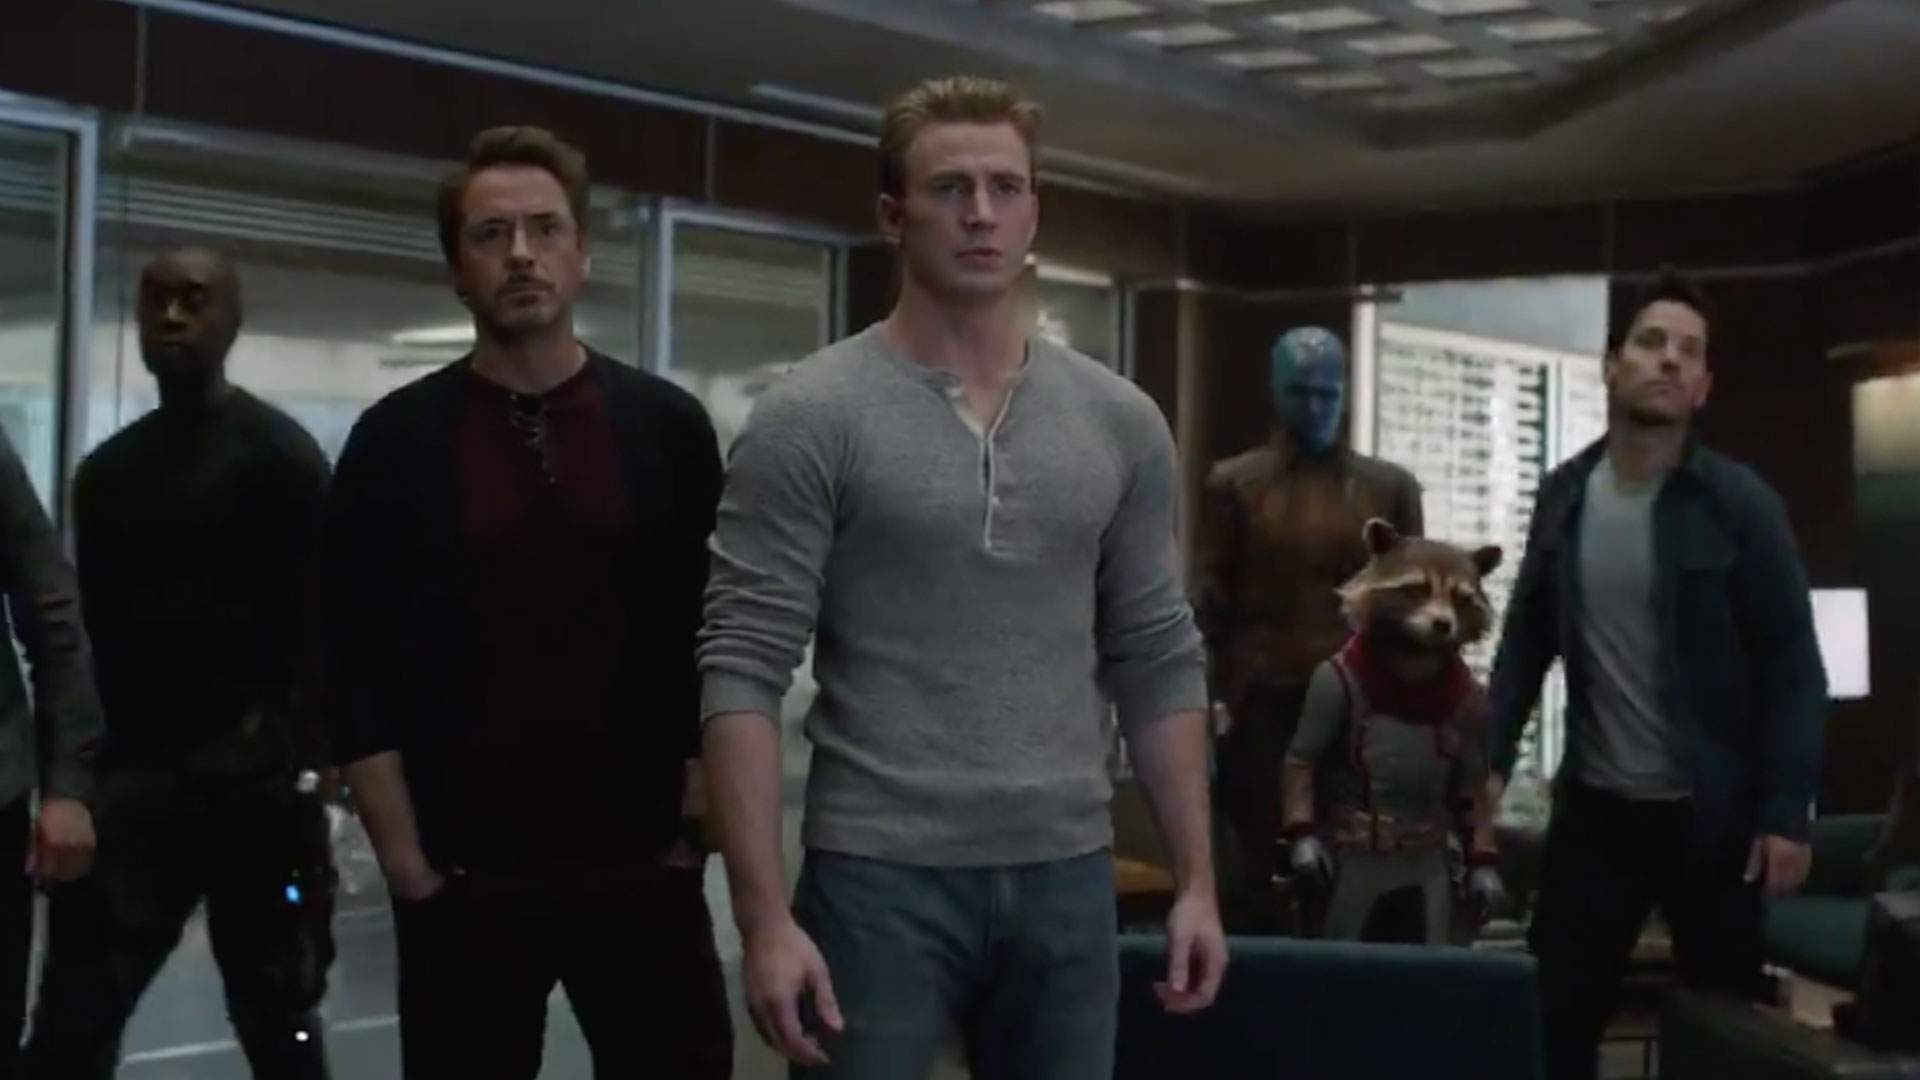 NFC Talks Avengers: Endgame, Trailers, Predictions and More!